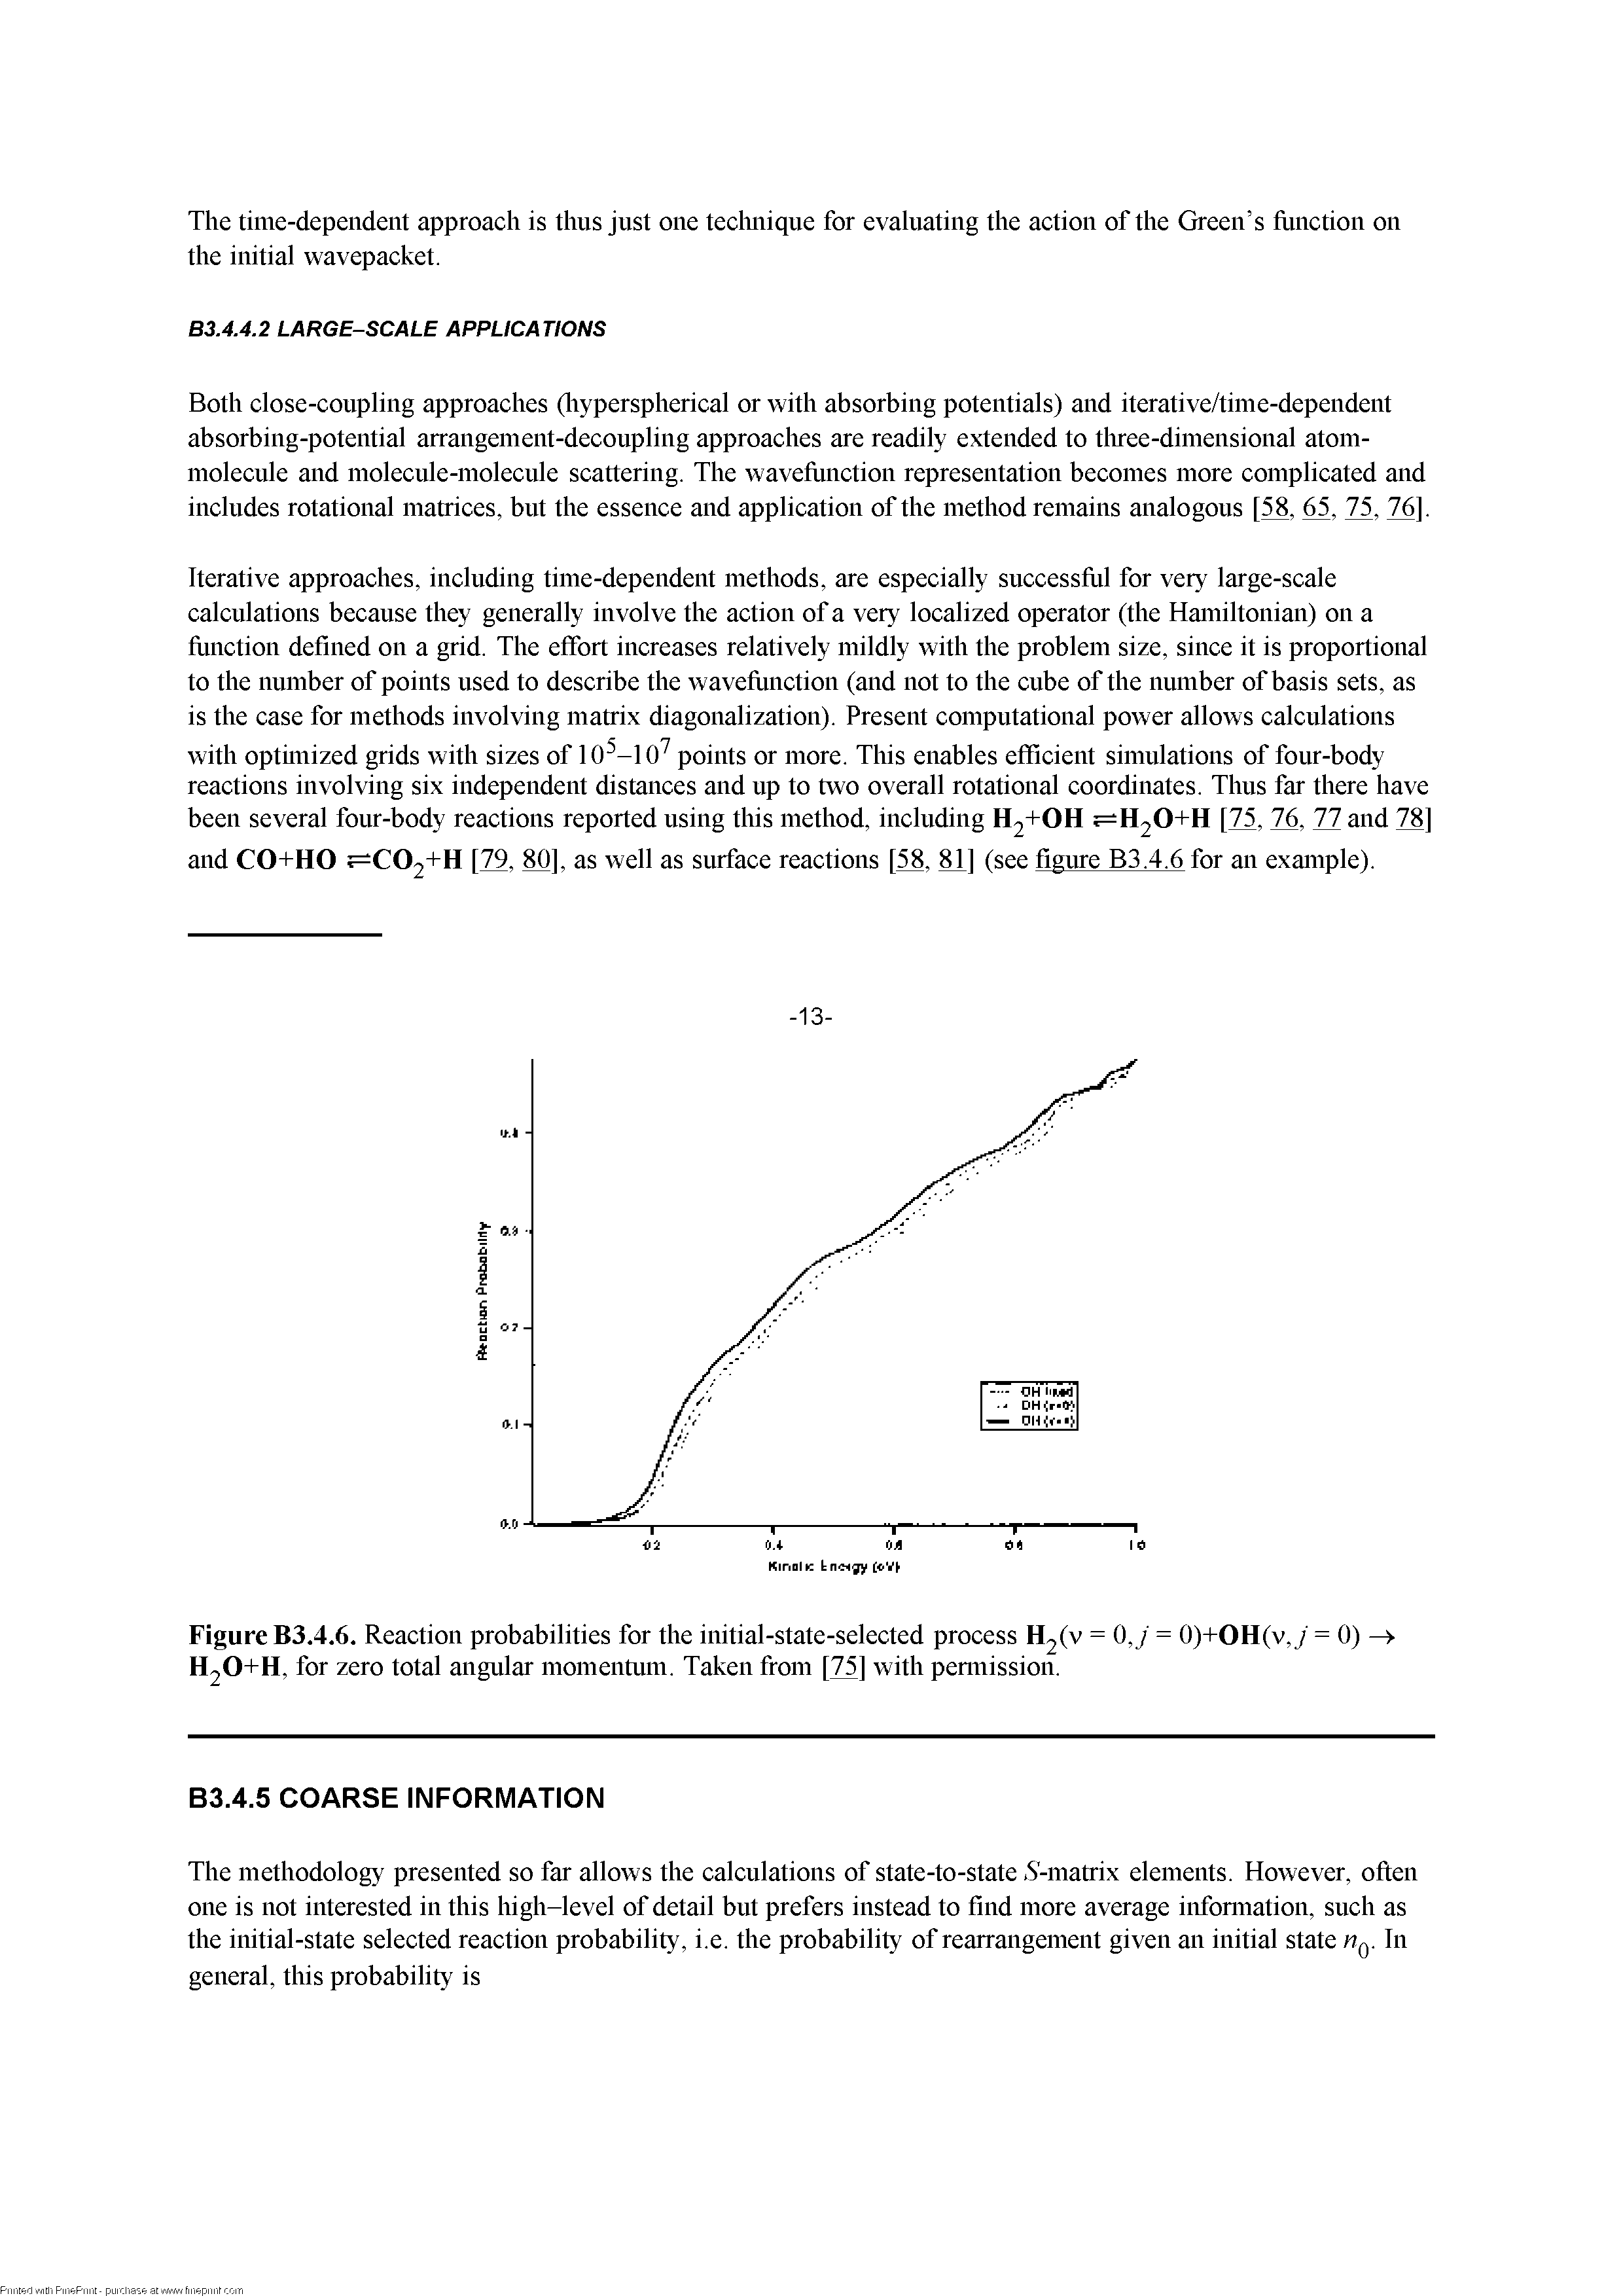 Figure B3.4.6. Reaction probabilities for the initial-state-selected process H2(v = 0,J = 0)+OH(v,y = 0) — H2O+H, for zero total angular momentum. Taken from [75] with pennission.